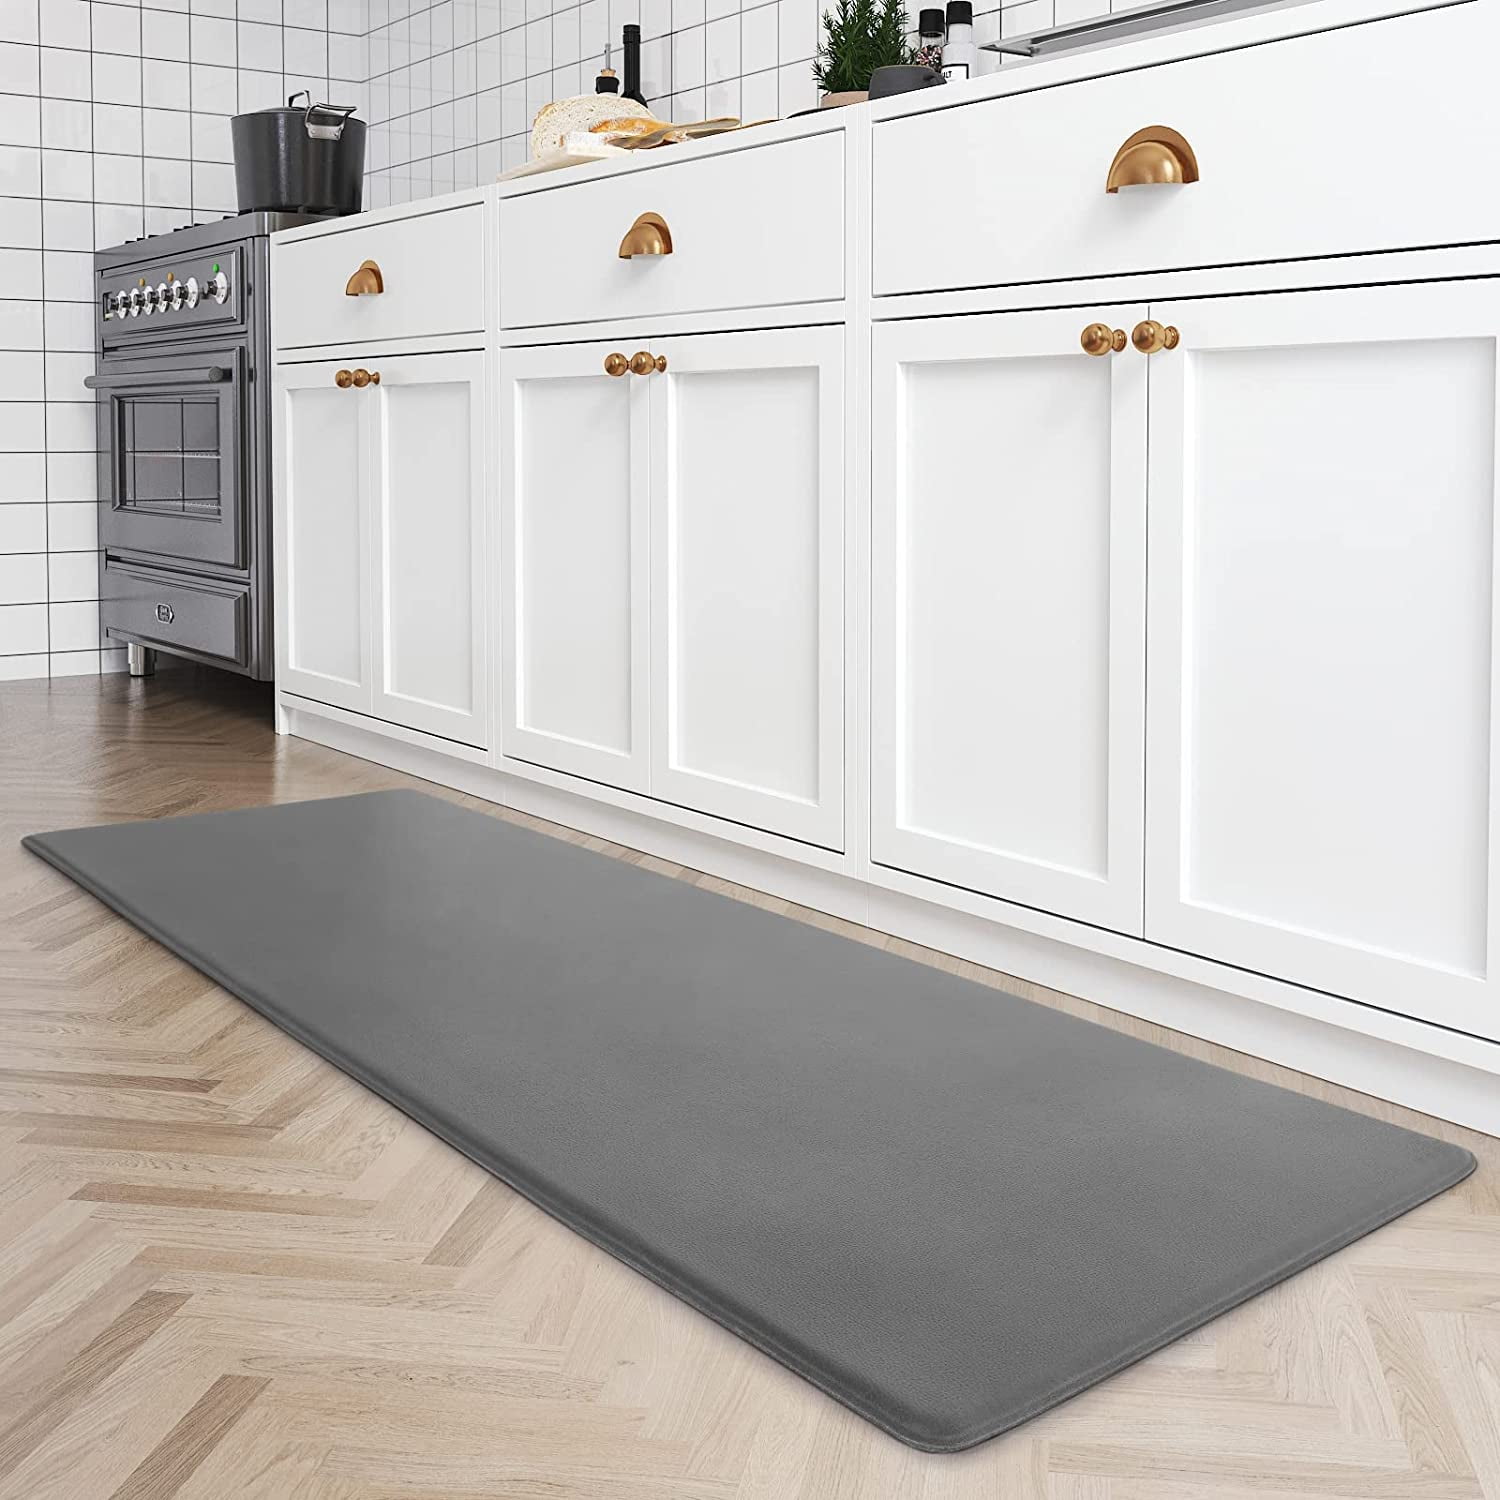 SIXHOME Kitchen Rug Anti Fatigue Kitchen Mats for Floor 17